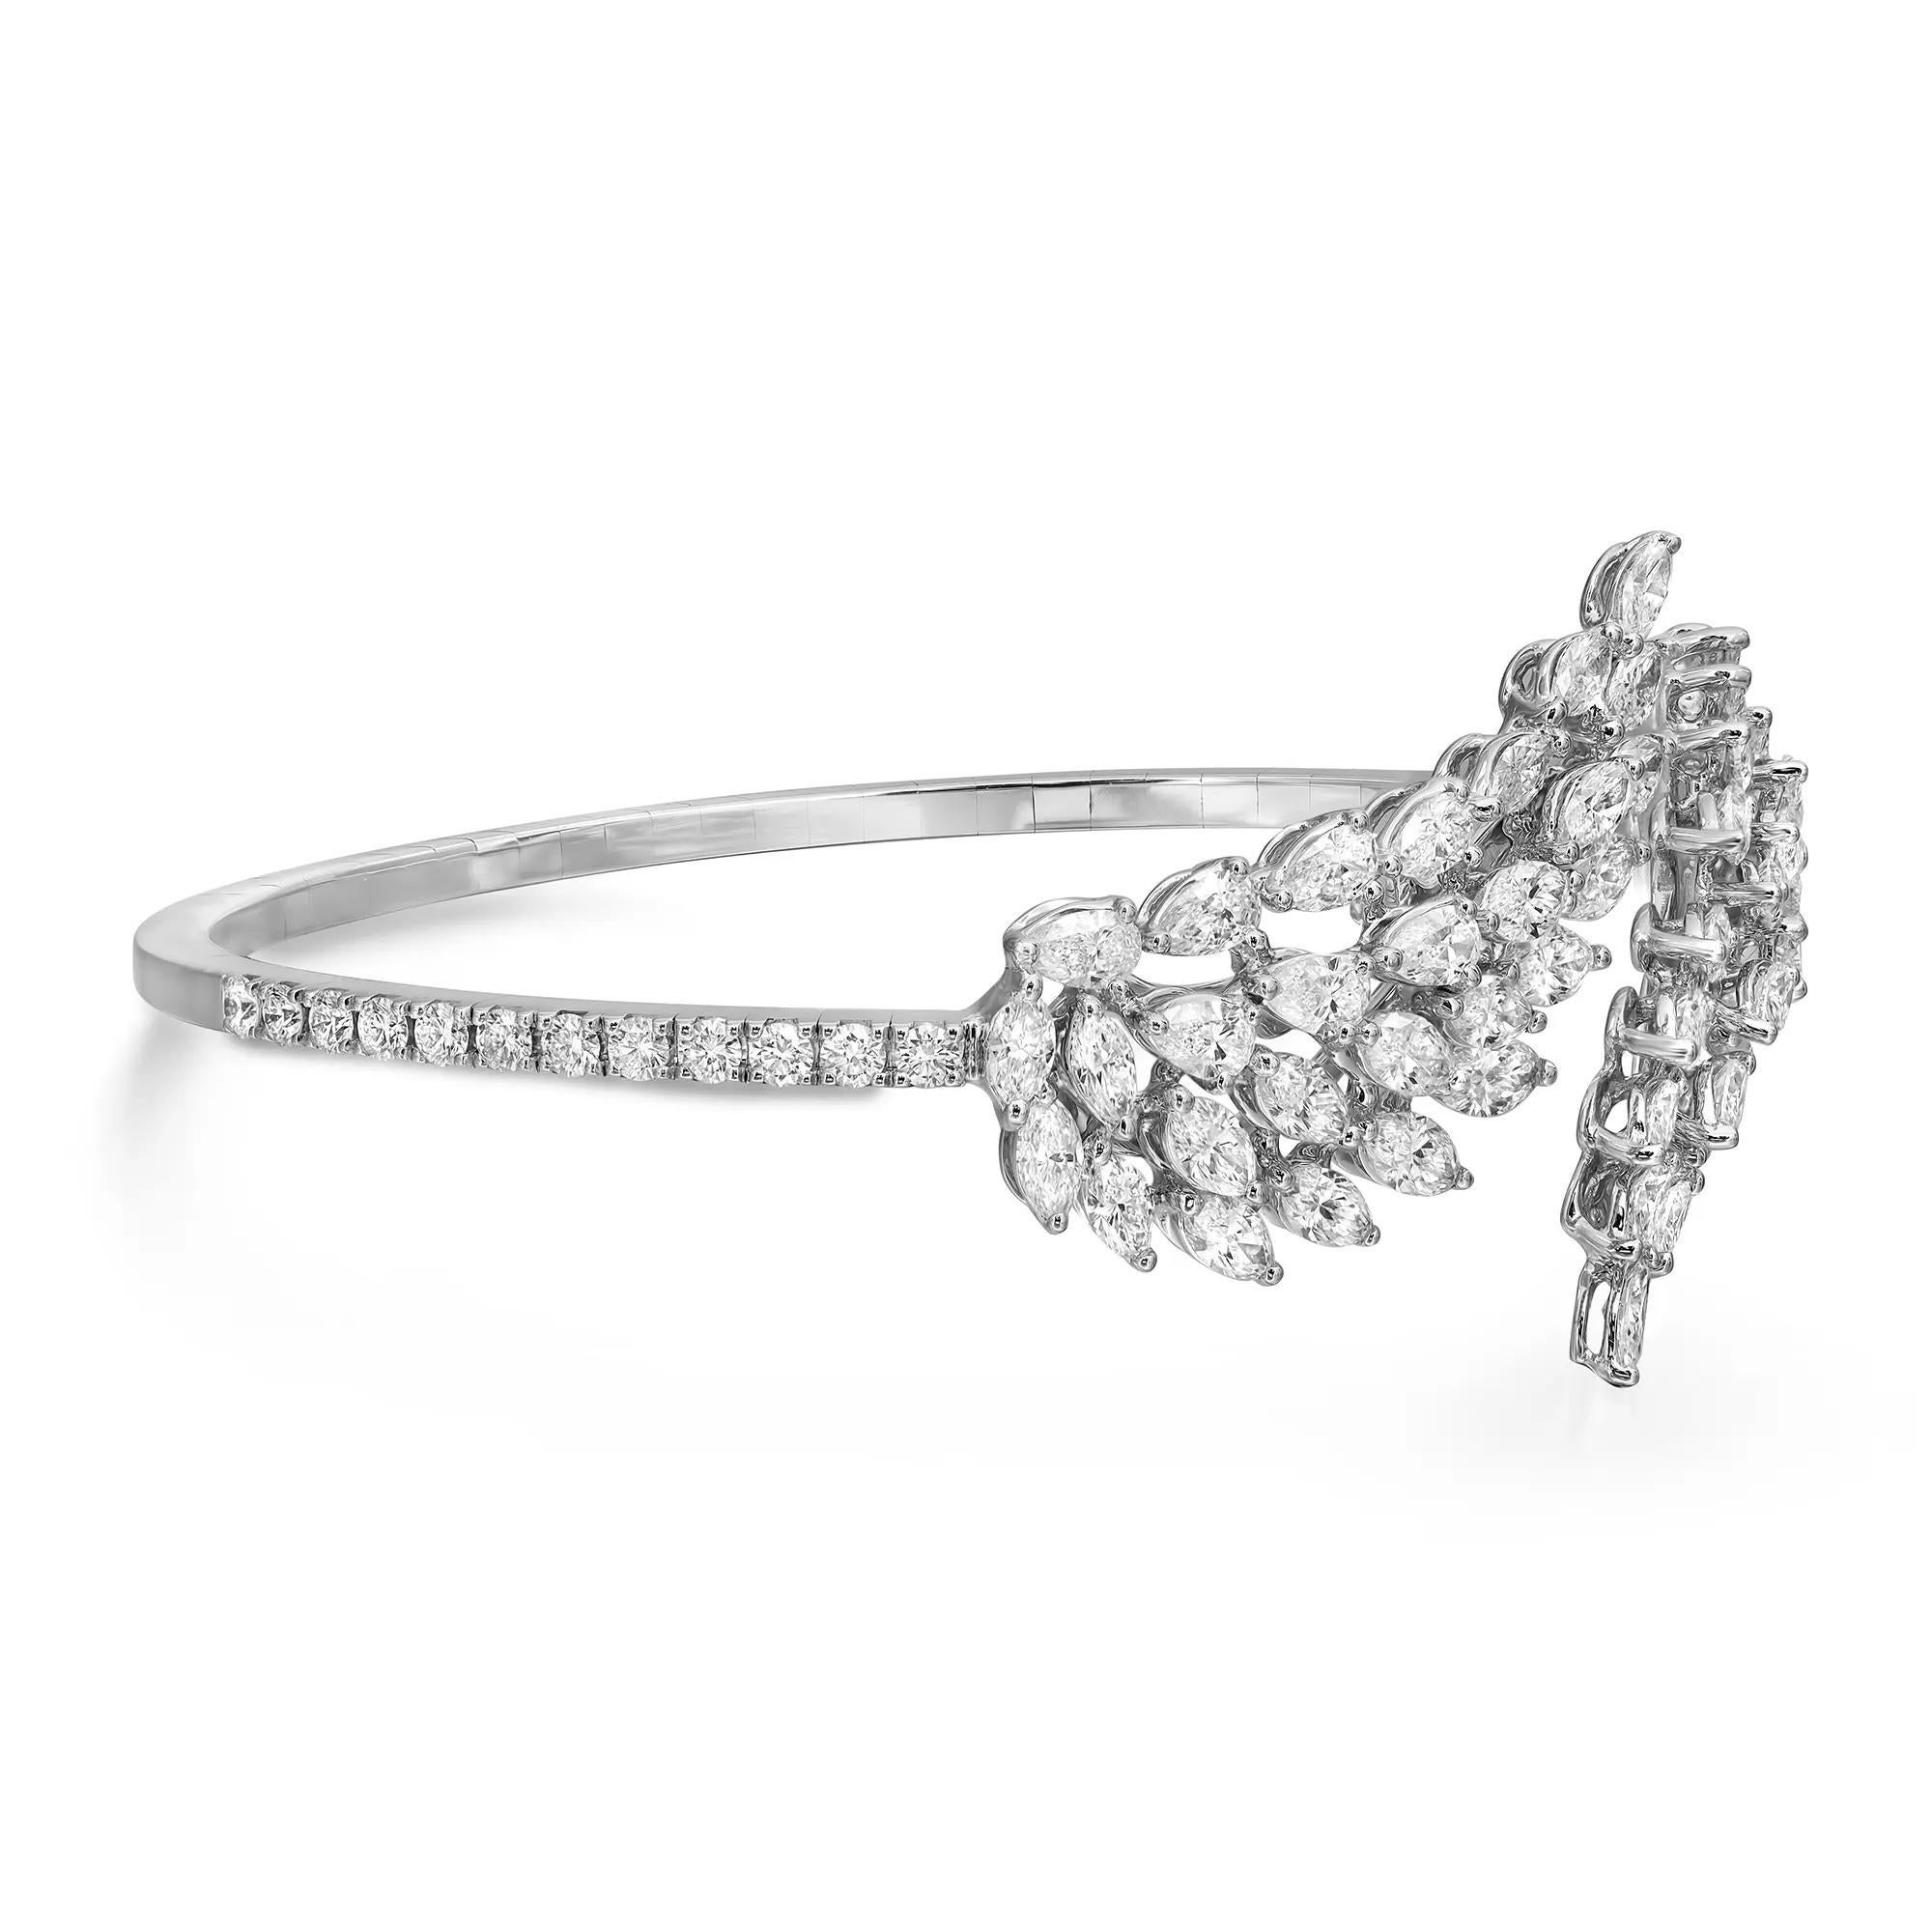 This gorgeous Messika Angel Double diamond bracelet exudes sophistication. Stunningly crafted in lustrous 18K white gold. It features wing-shaped tips that glisten with prong set sparkling marquise and pear cut diamonds with round brilliant cut